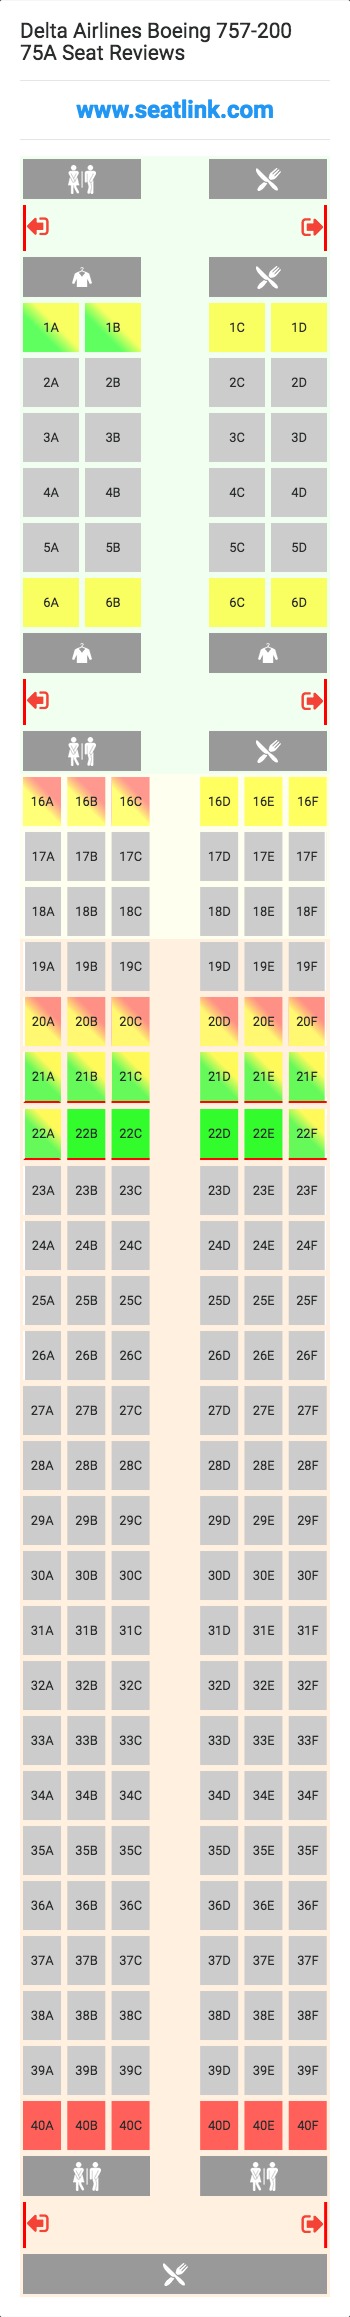 Delta Boeing 757 Jet Seating Chart